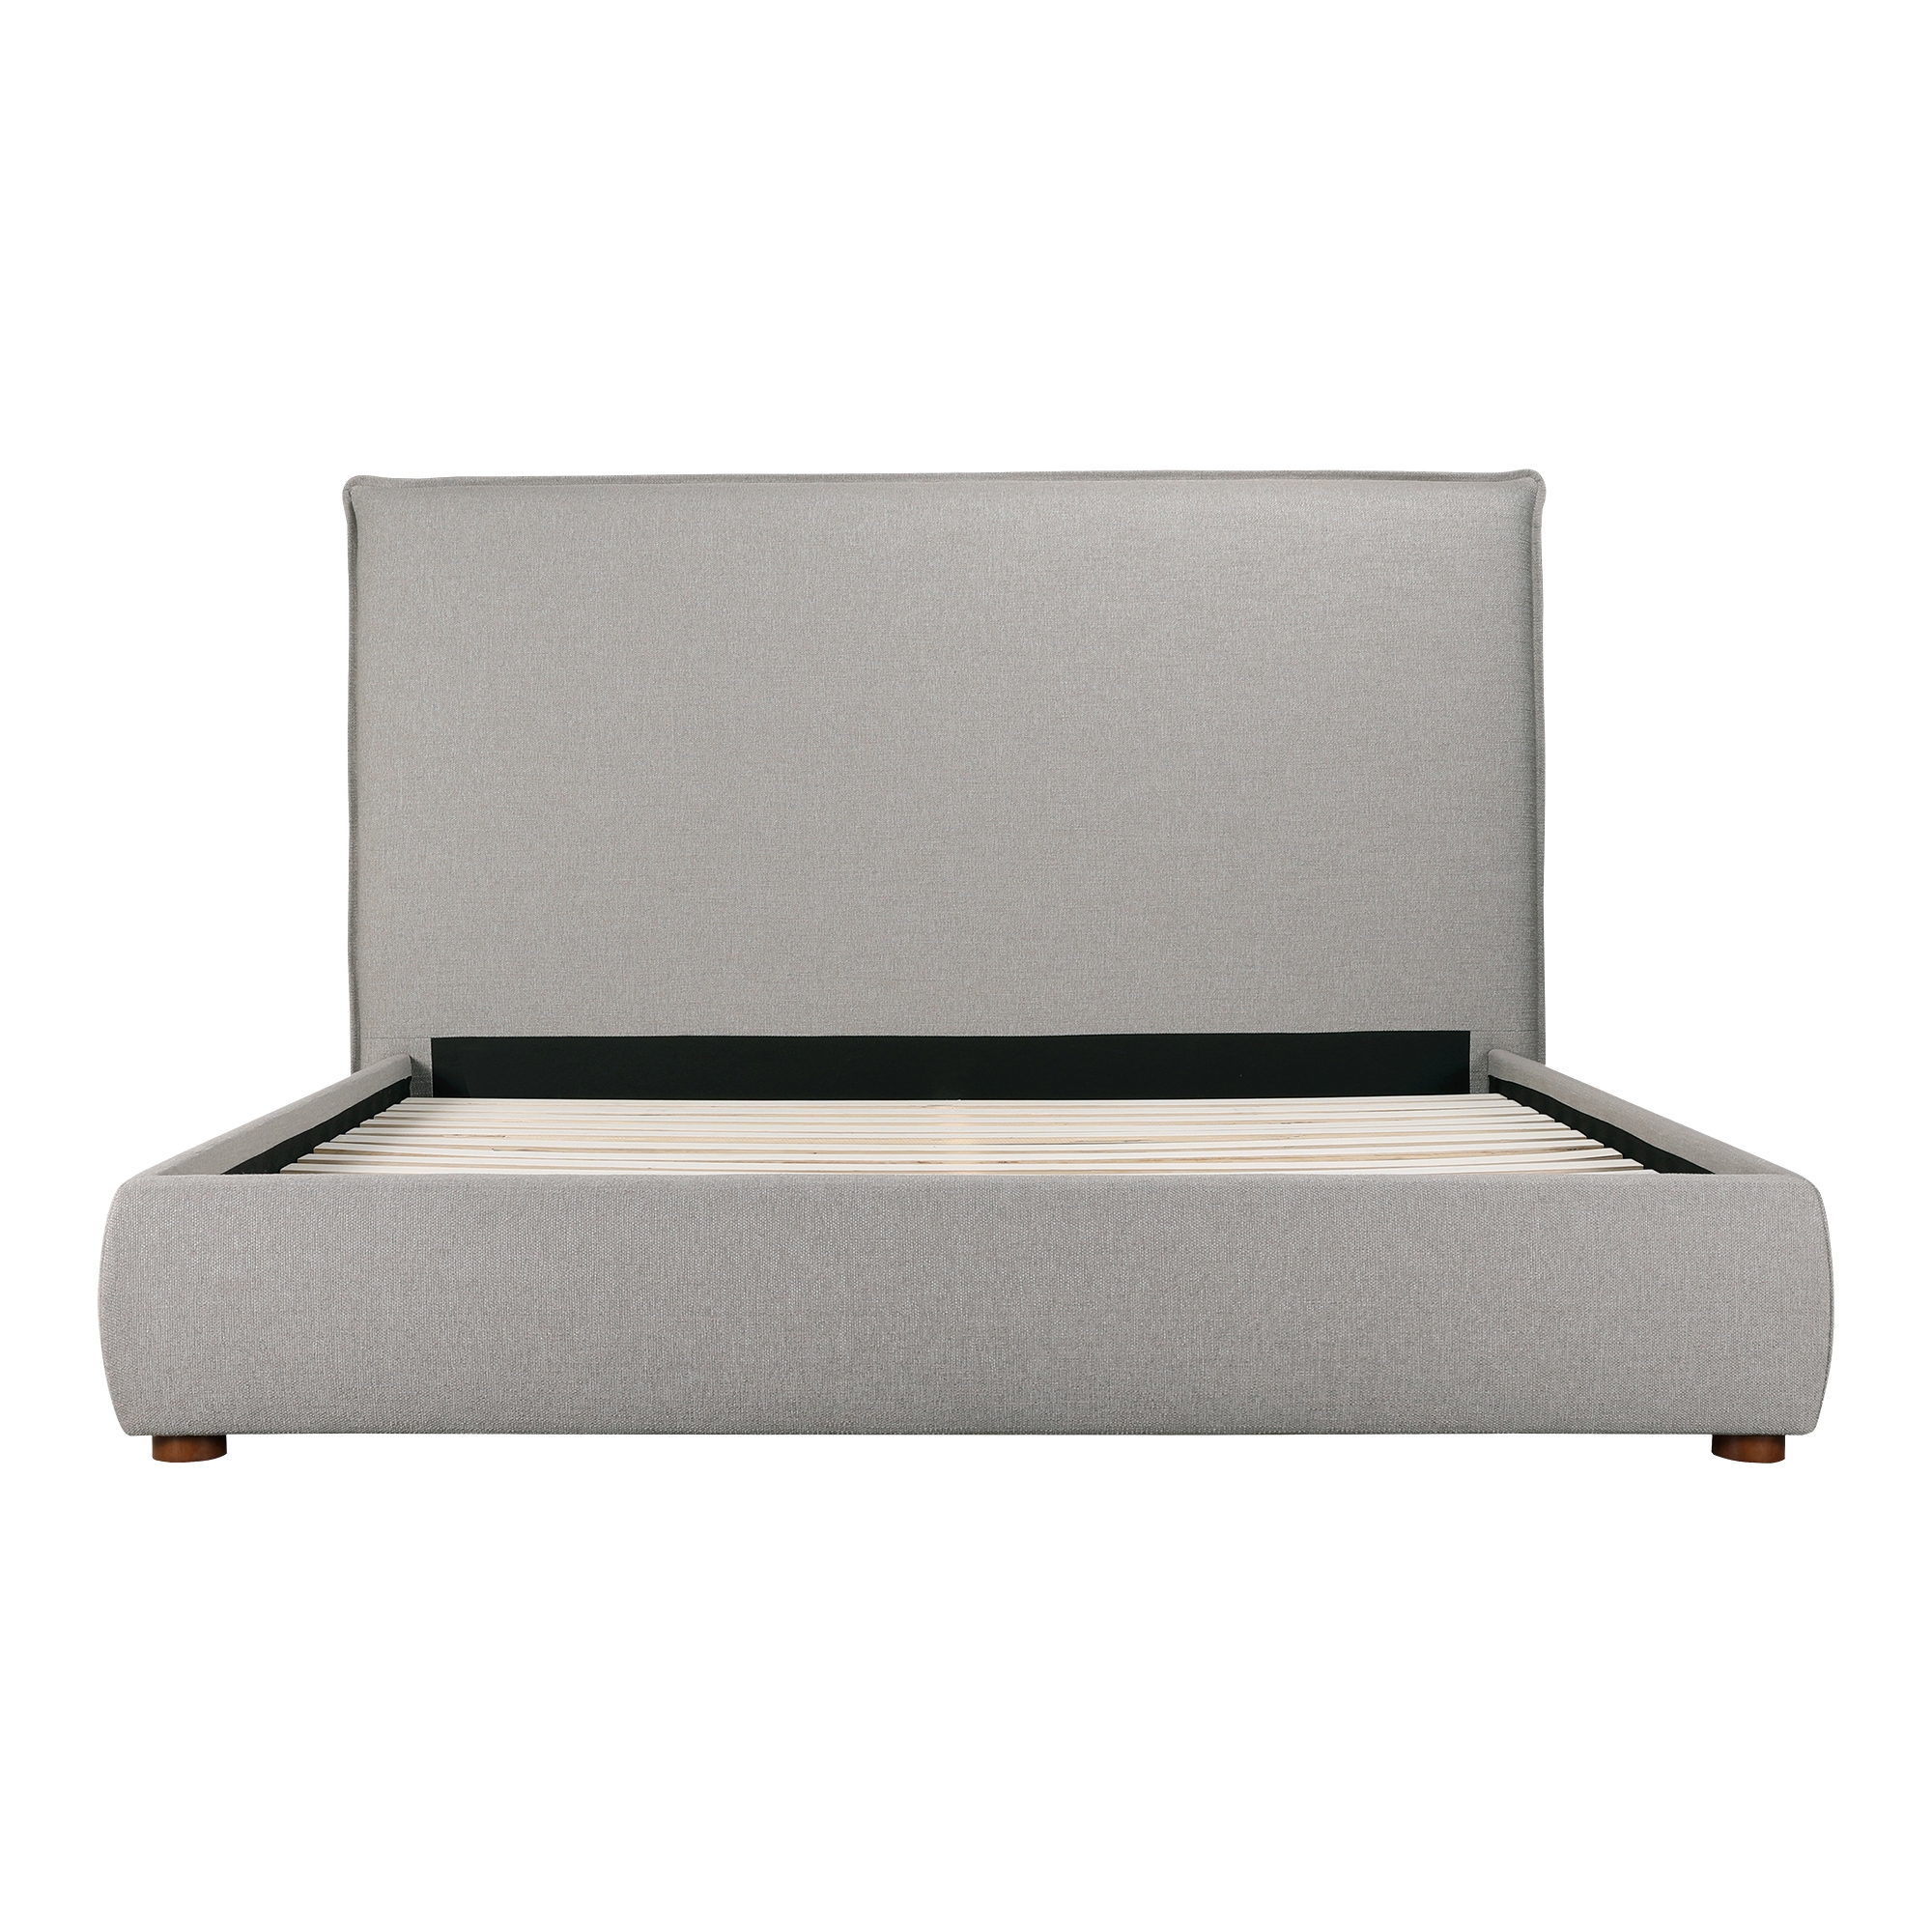 Luzon Queen Bed Tall Headboard Greystone - Image 0